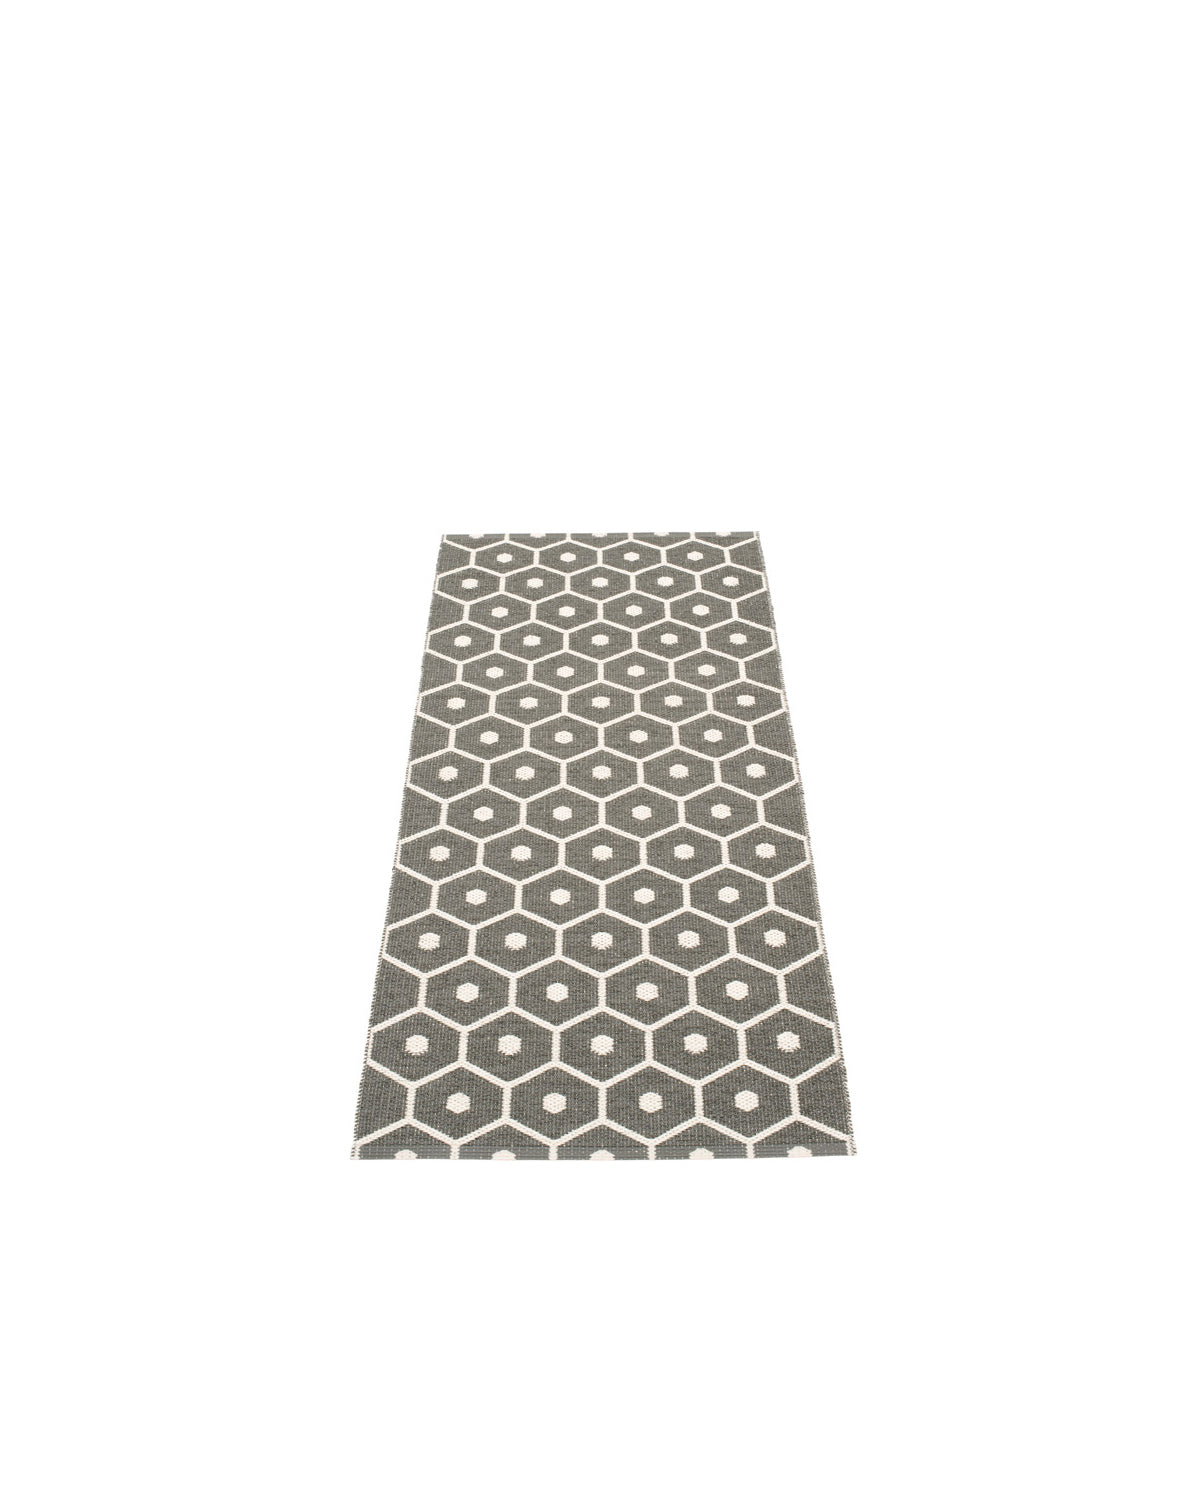 Pappelina Rug HONEY Charcoal  image 1